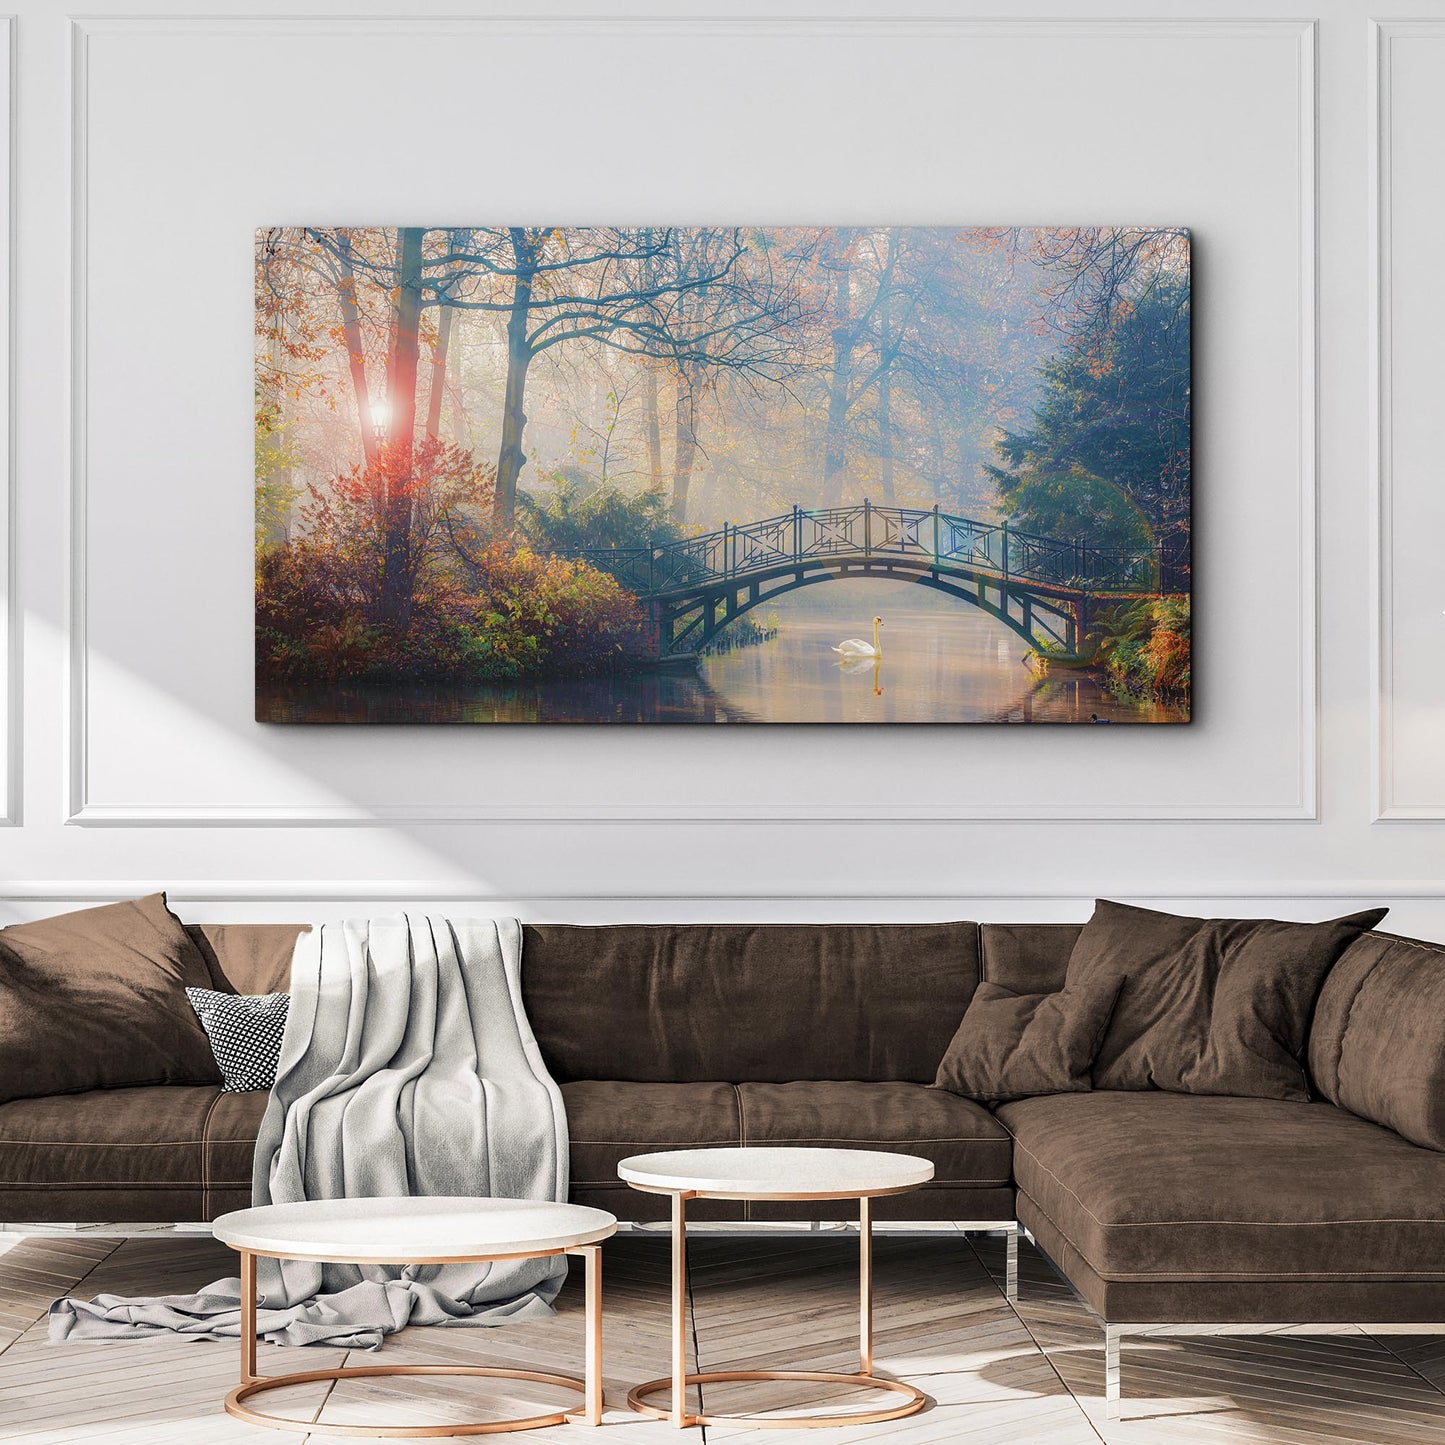 Misty Park Bridge Canvas Wall Art Style 2 - Image by Tailored Canvases